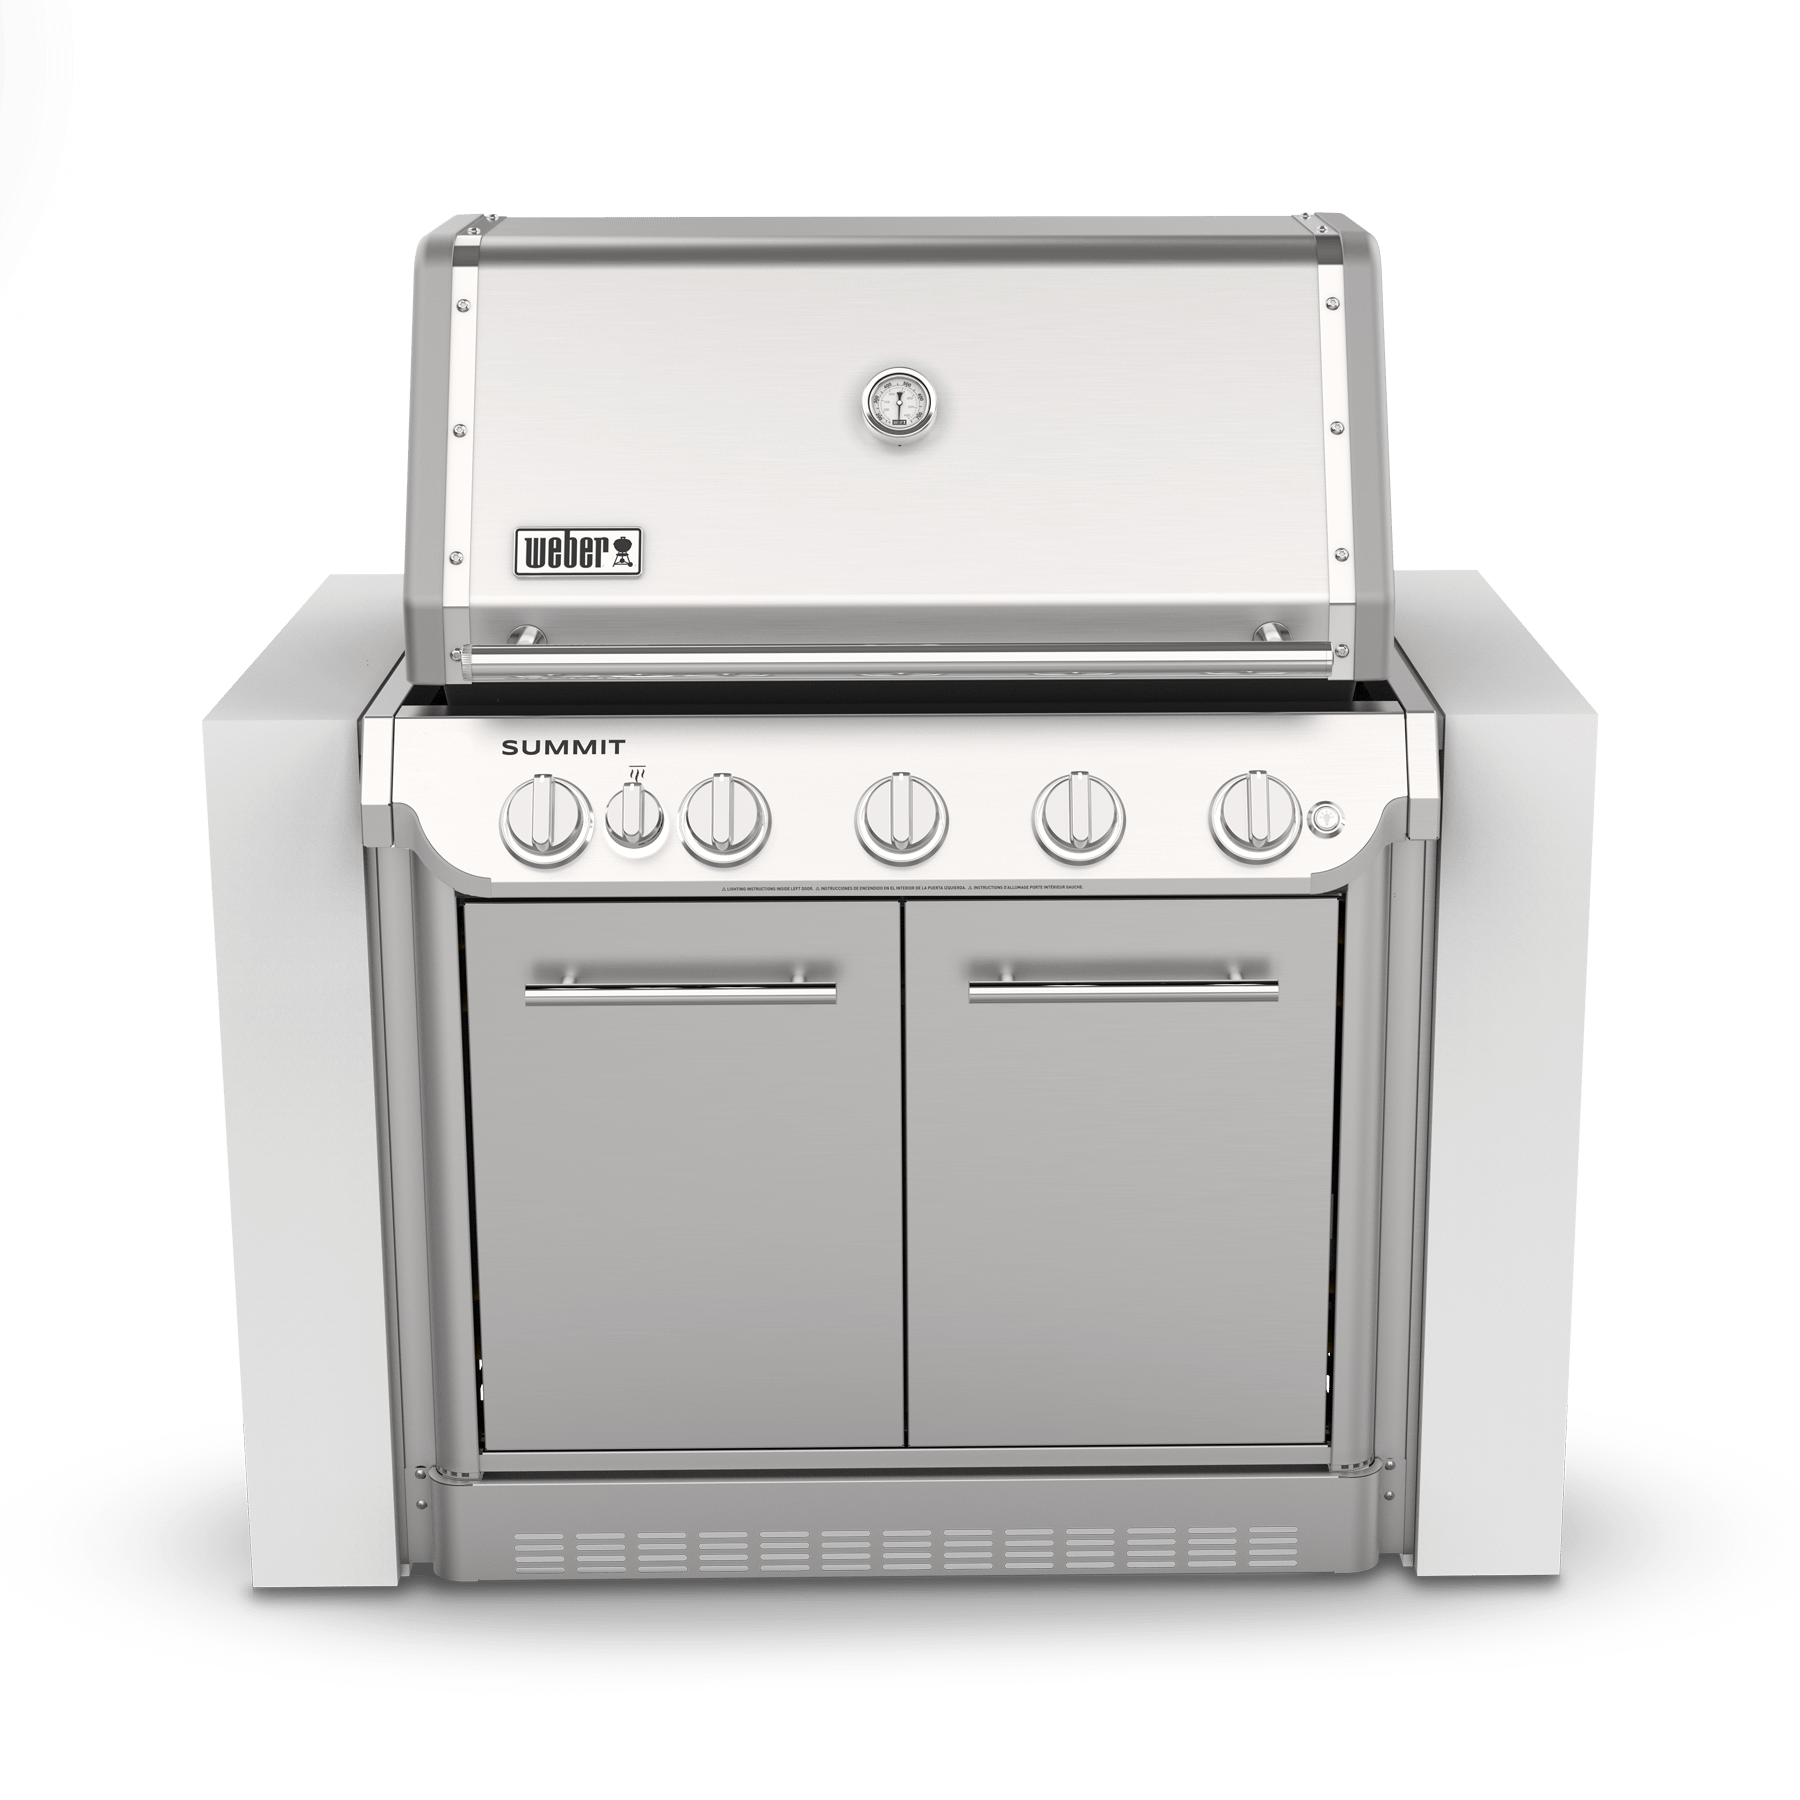 Weber 1500042 Summit? Sb38 S Built-In Gas Grill (Liquid Propane) - Stainless Steel